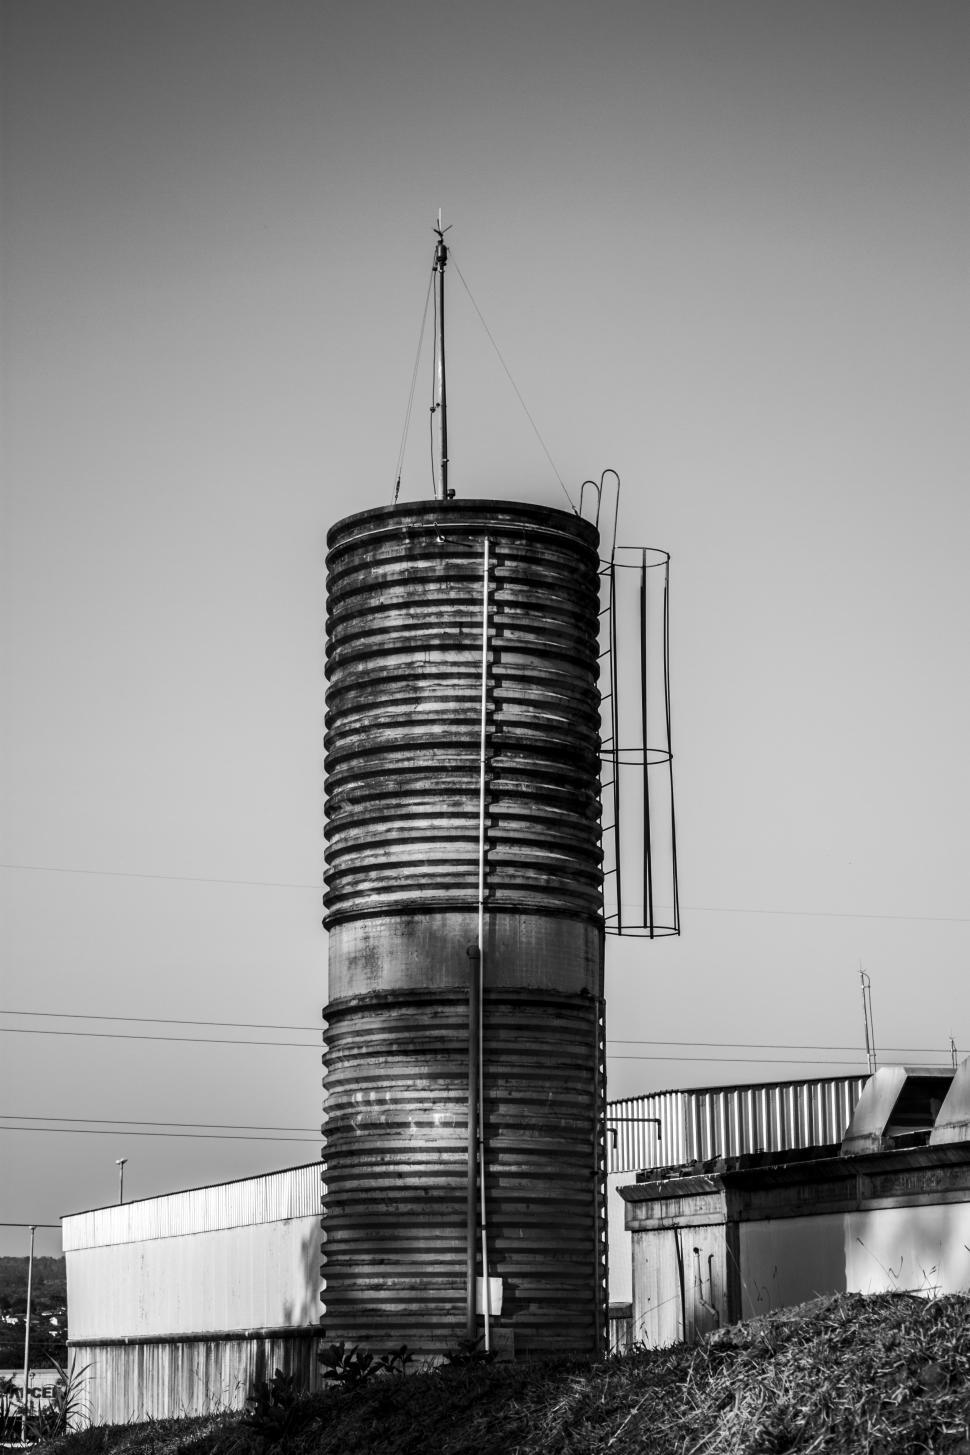 Free Image of Old Concrete Water Tower 